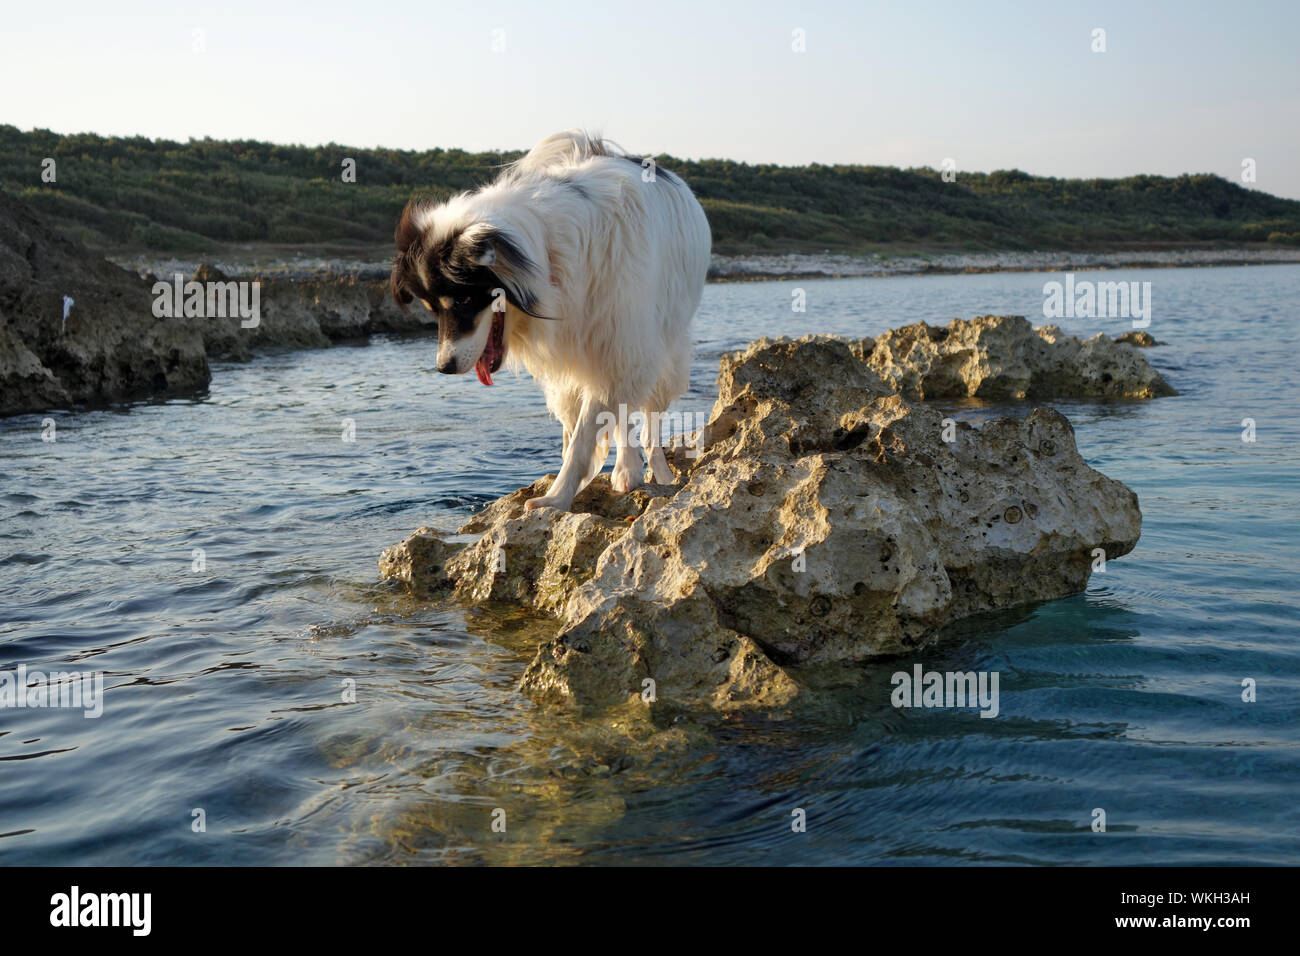 IM MEER SCHWIMMENDER HUND . DOG SWIMMING IN THE SEA Stock Photo